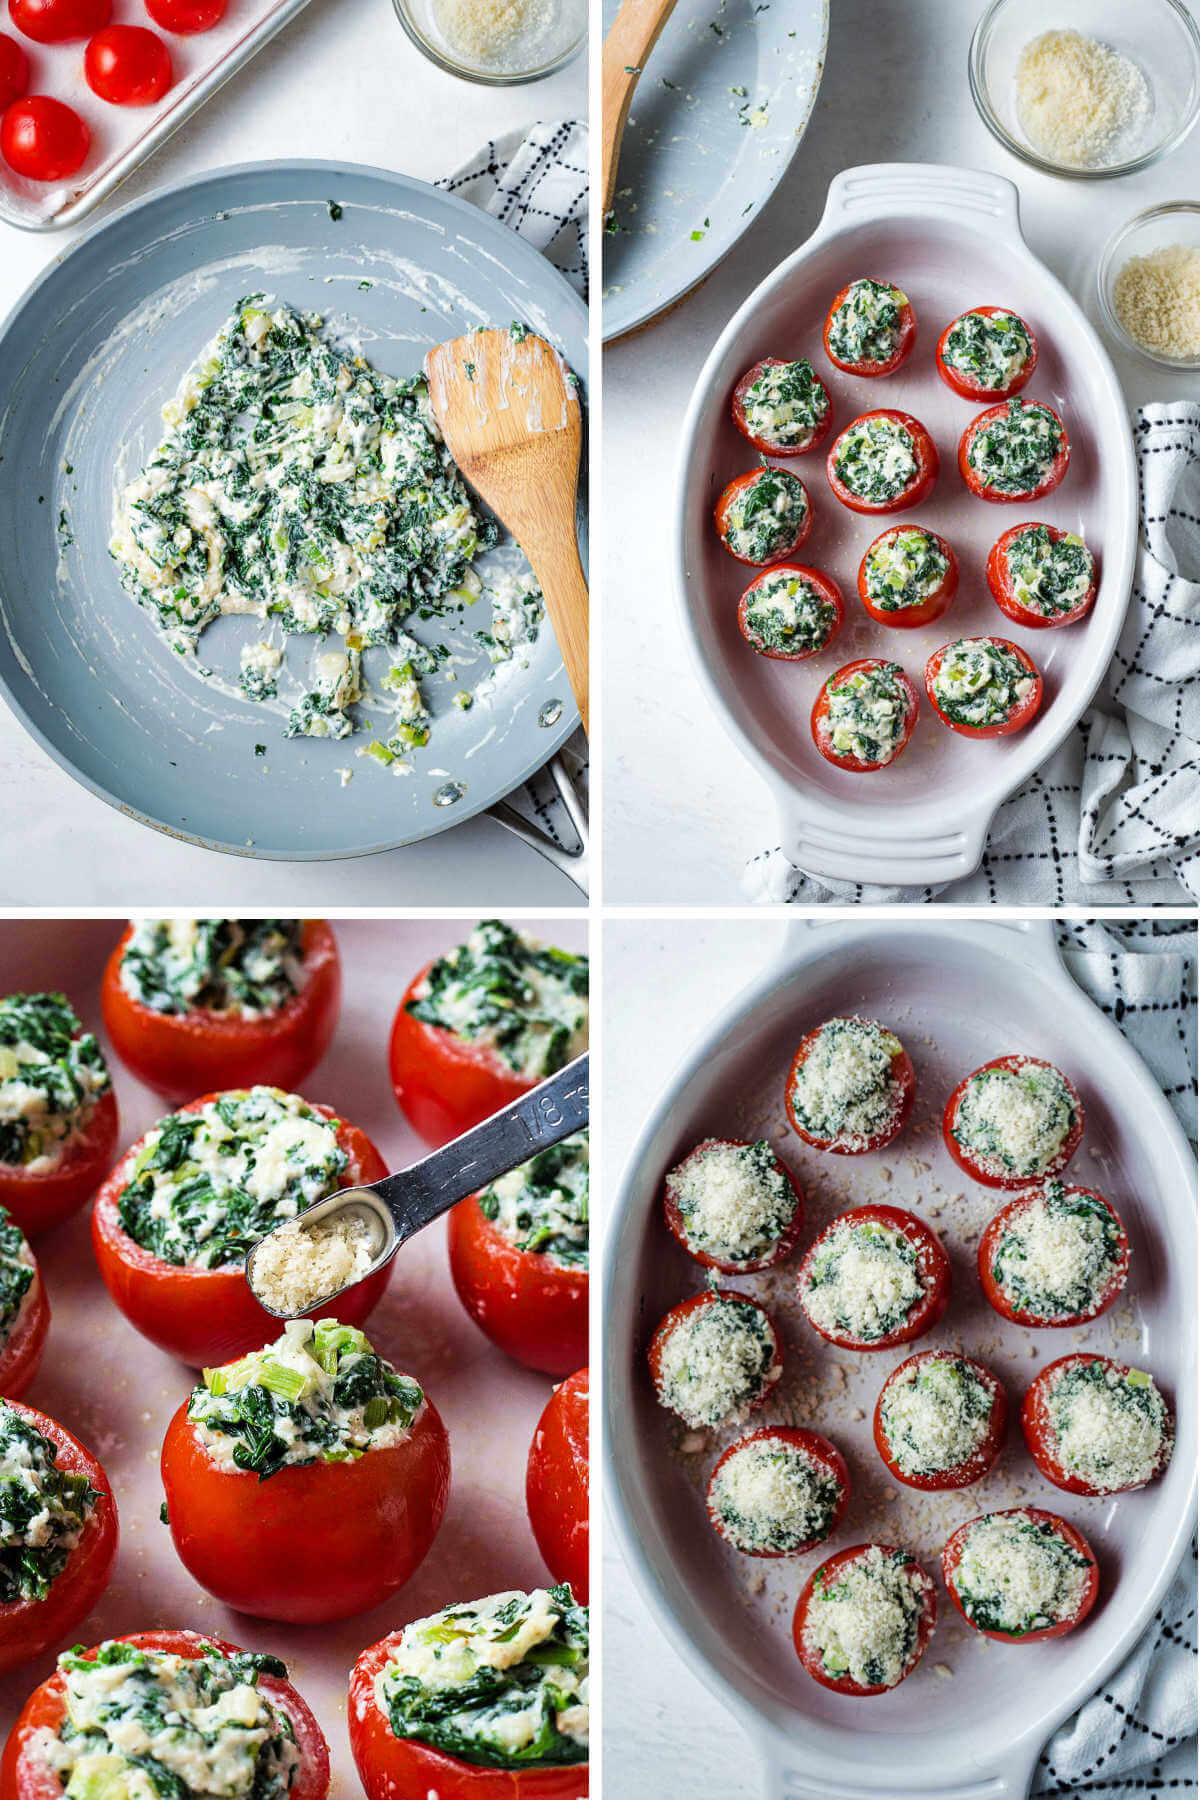 spinach mixture in a skillet; stuffed tomatoes in a baking dish; sprinkling more panko breadcrumbs and parmesan cheese on stuffed tomatoes ready for the oven,